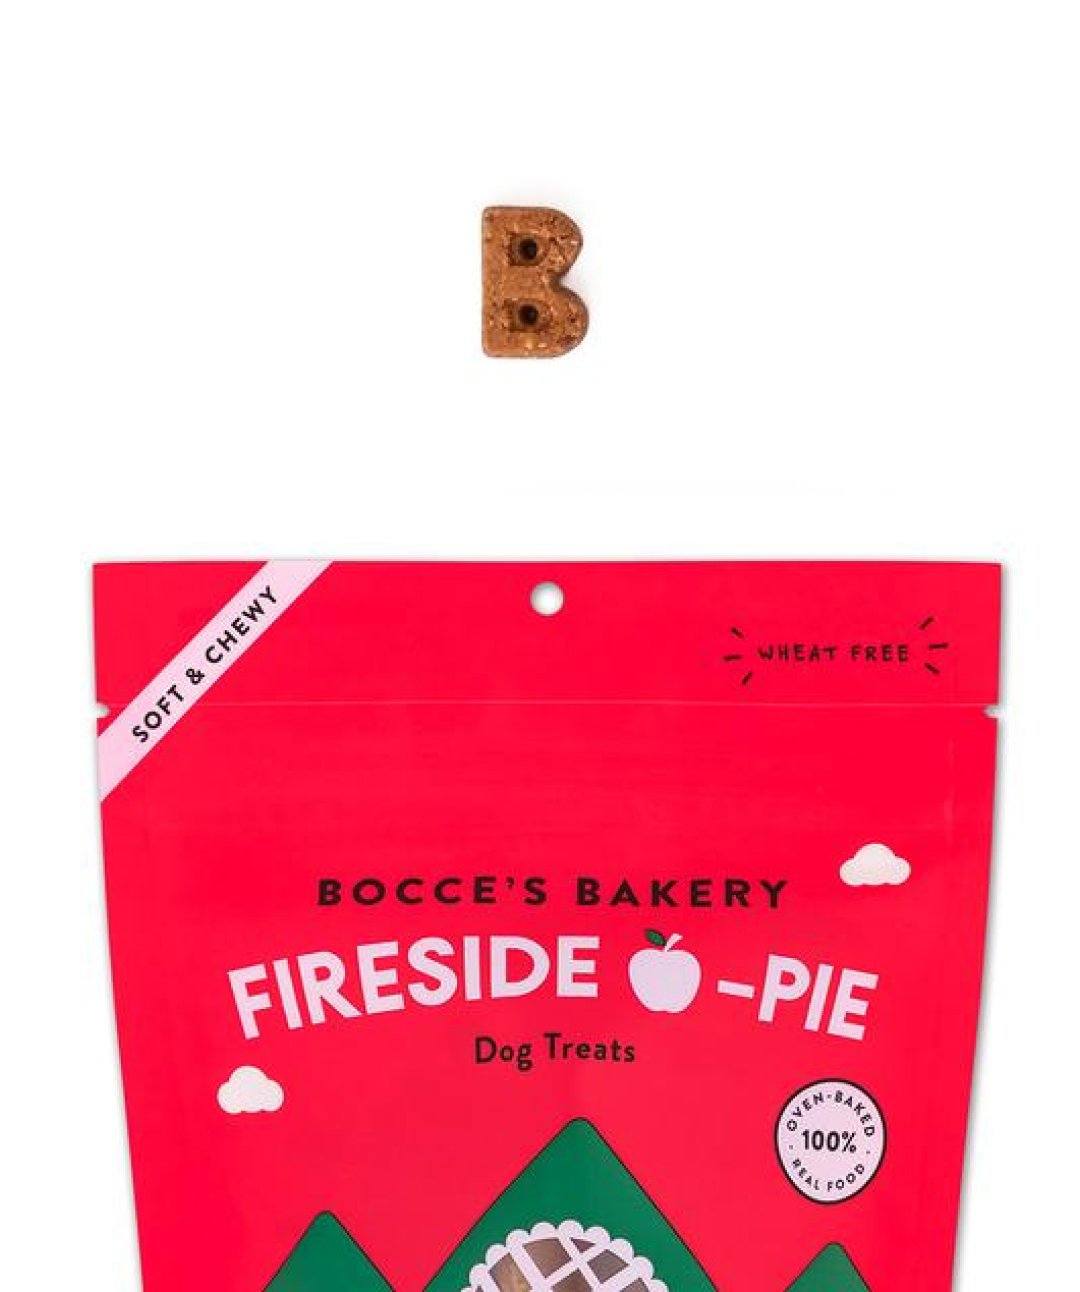 Bocce’s Fireside Apple Pie Soft & Chewy Treats Dog Treats Rover 